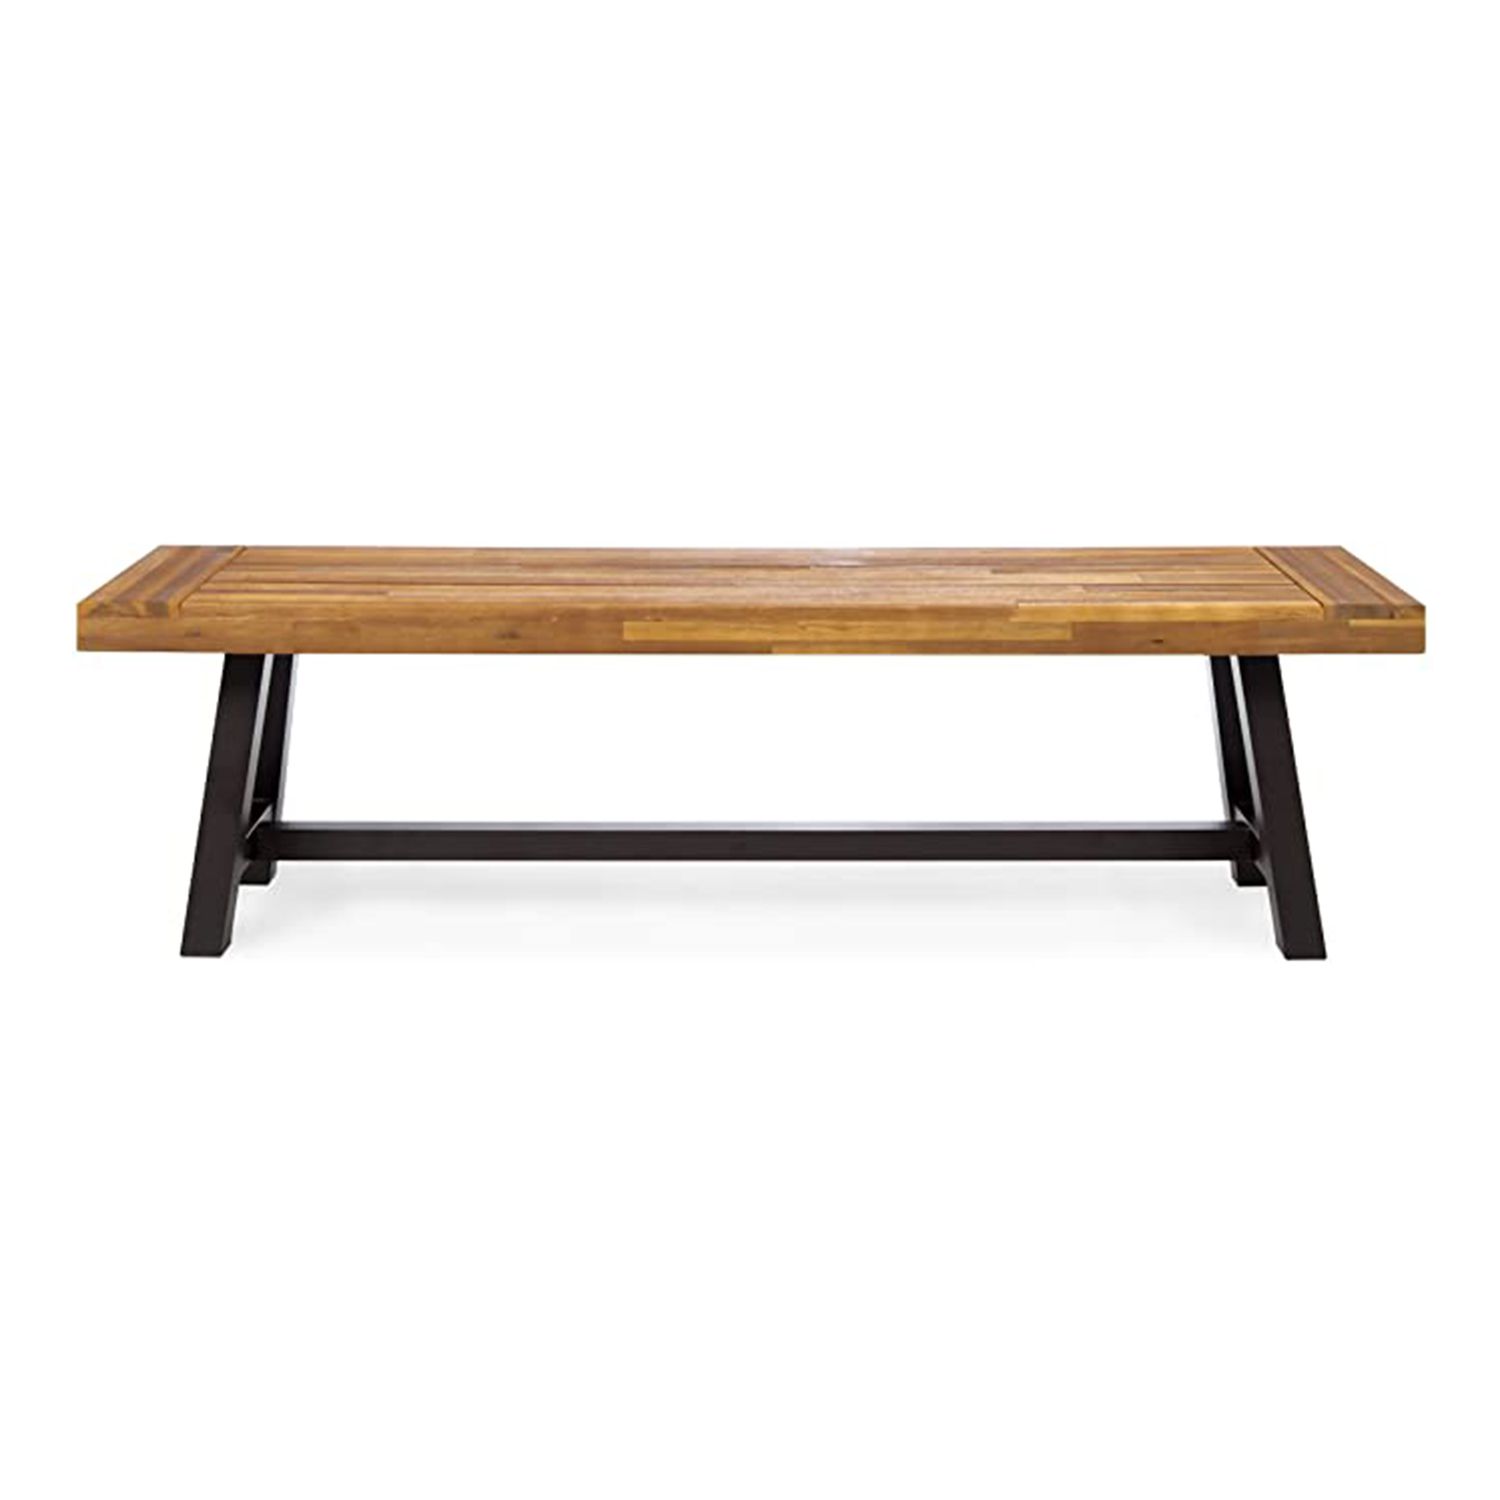 Christopher Knight Home Carlisle Outdoor Acacia Wood and Rustic Metal Bench